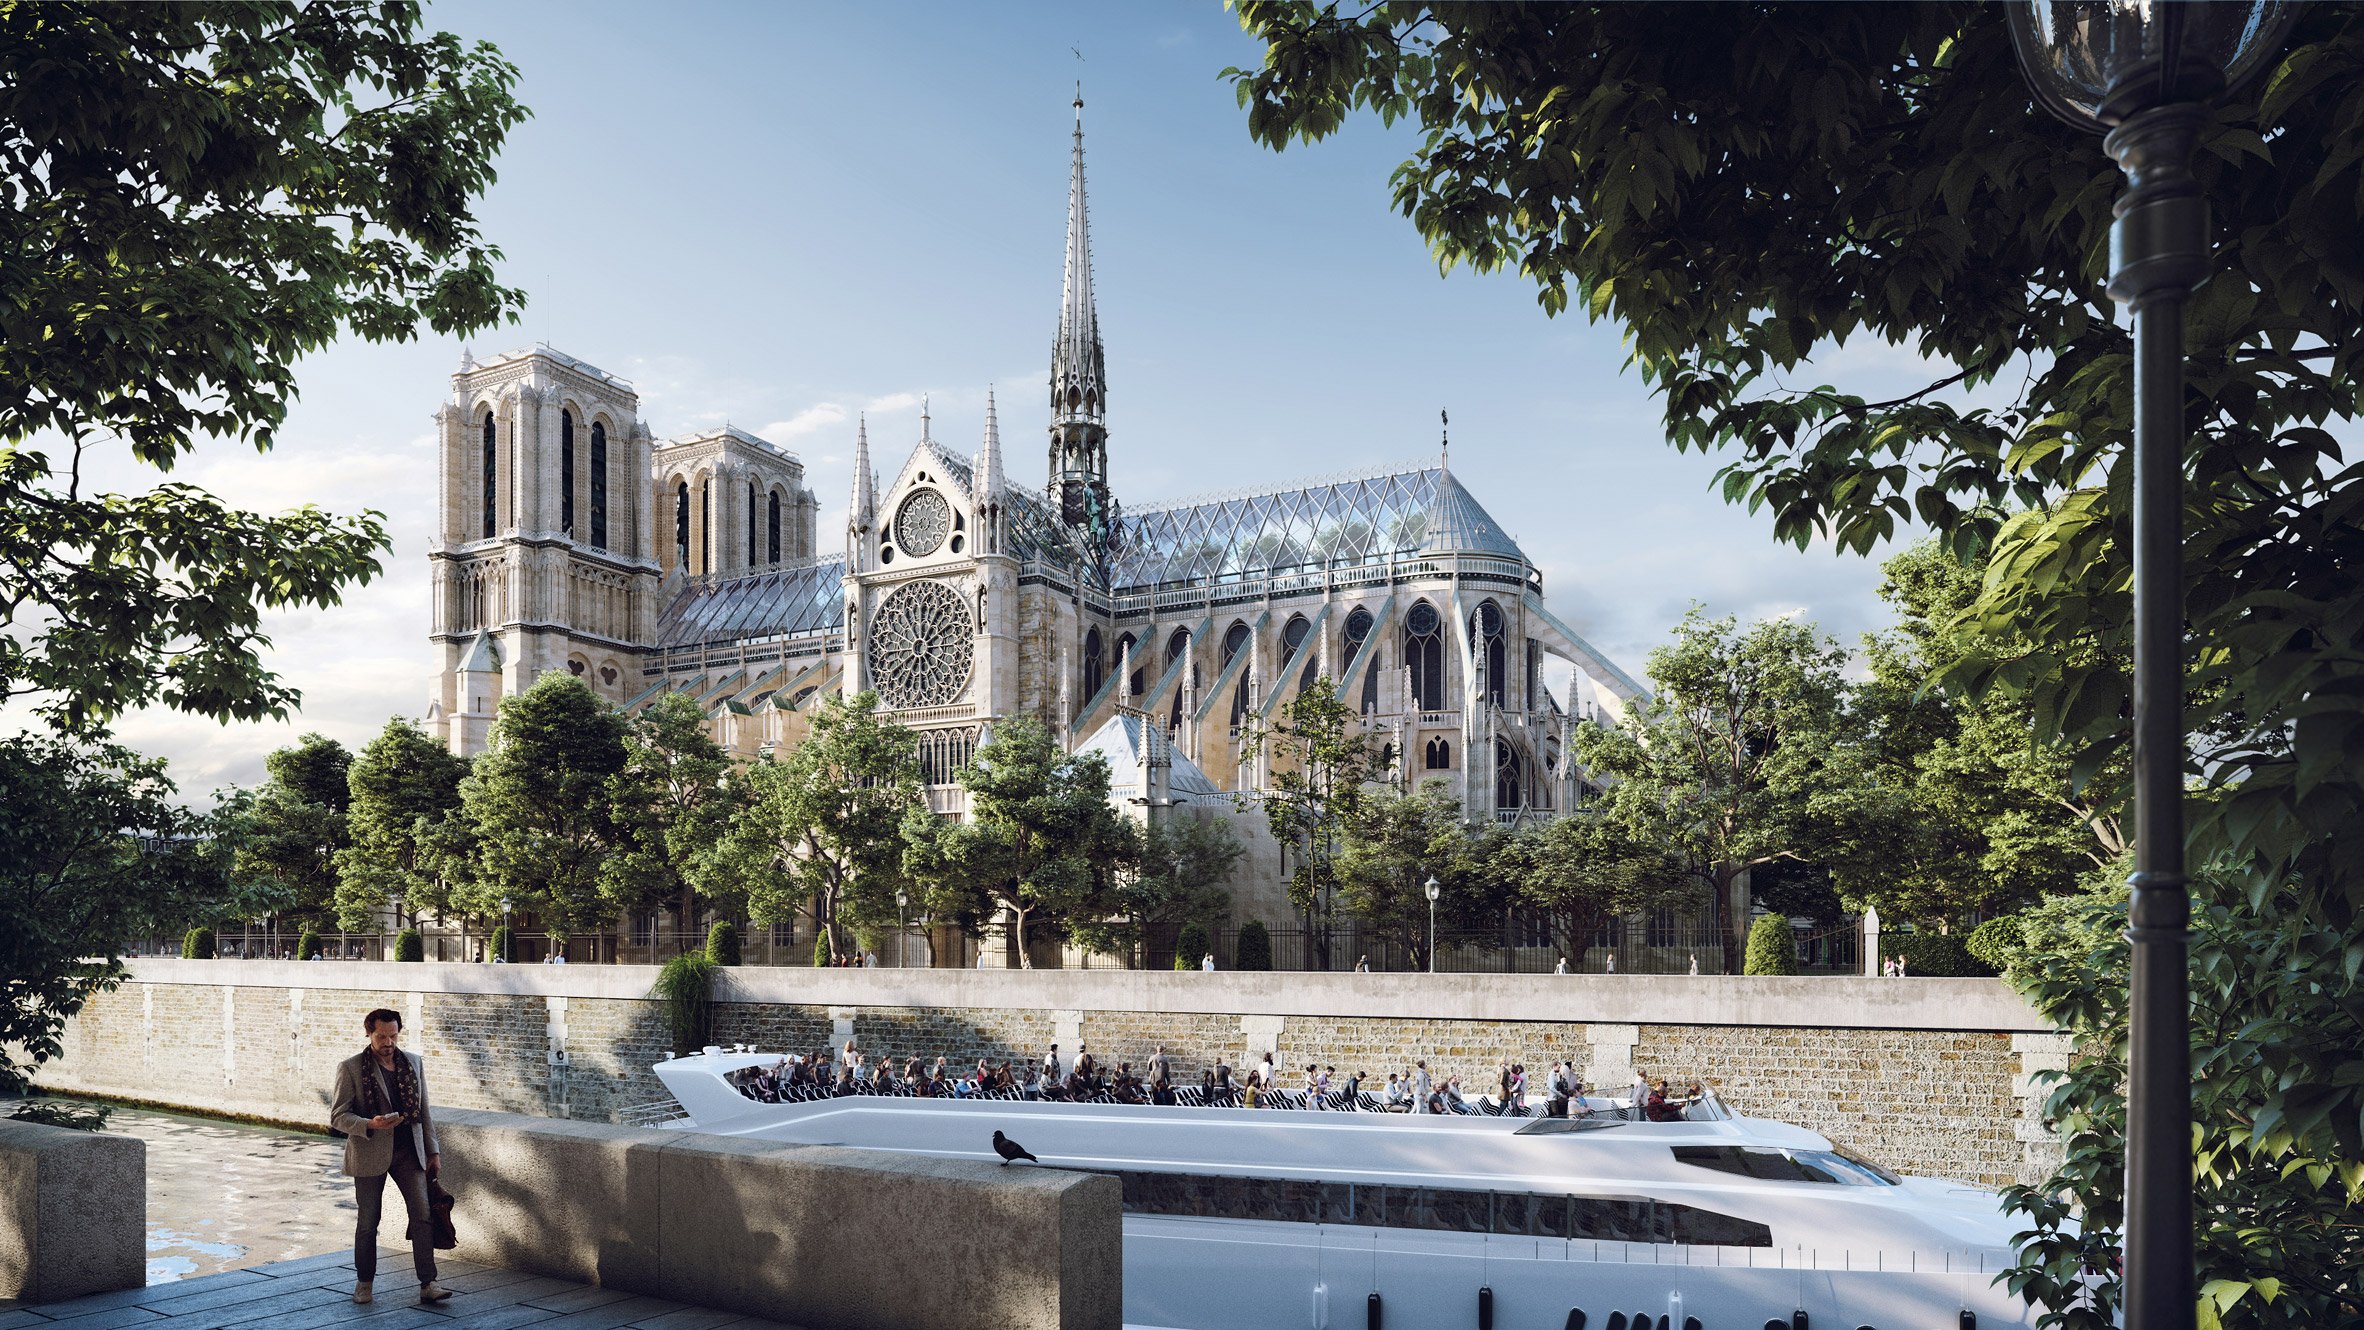 notre-dame-cathedral-roof-replacement-miysis_dezeen_2364_col_20-1.jpg